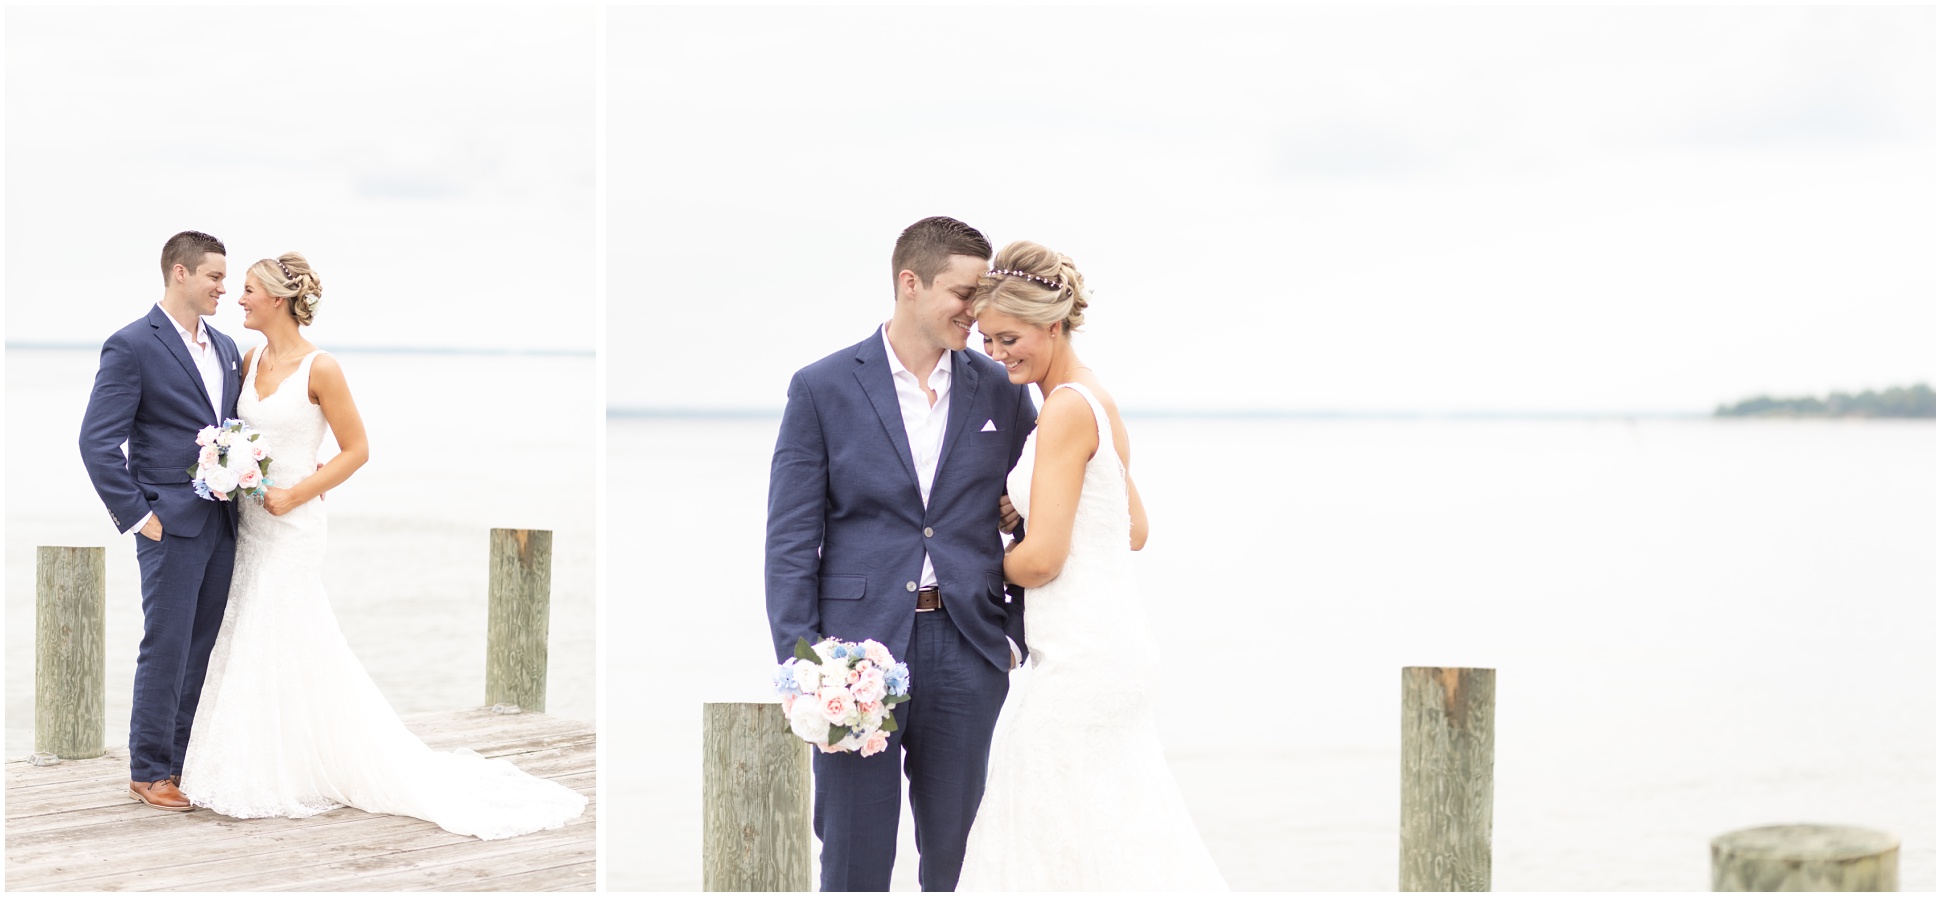 Bride and groom on the beach at Weatherly Farm